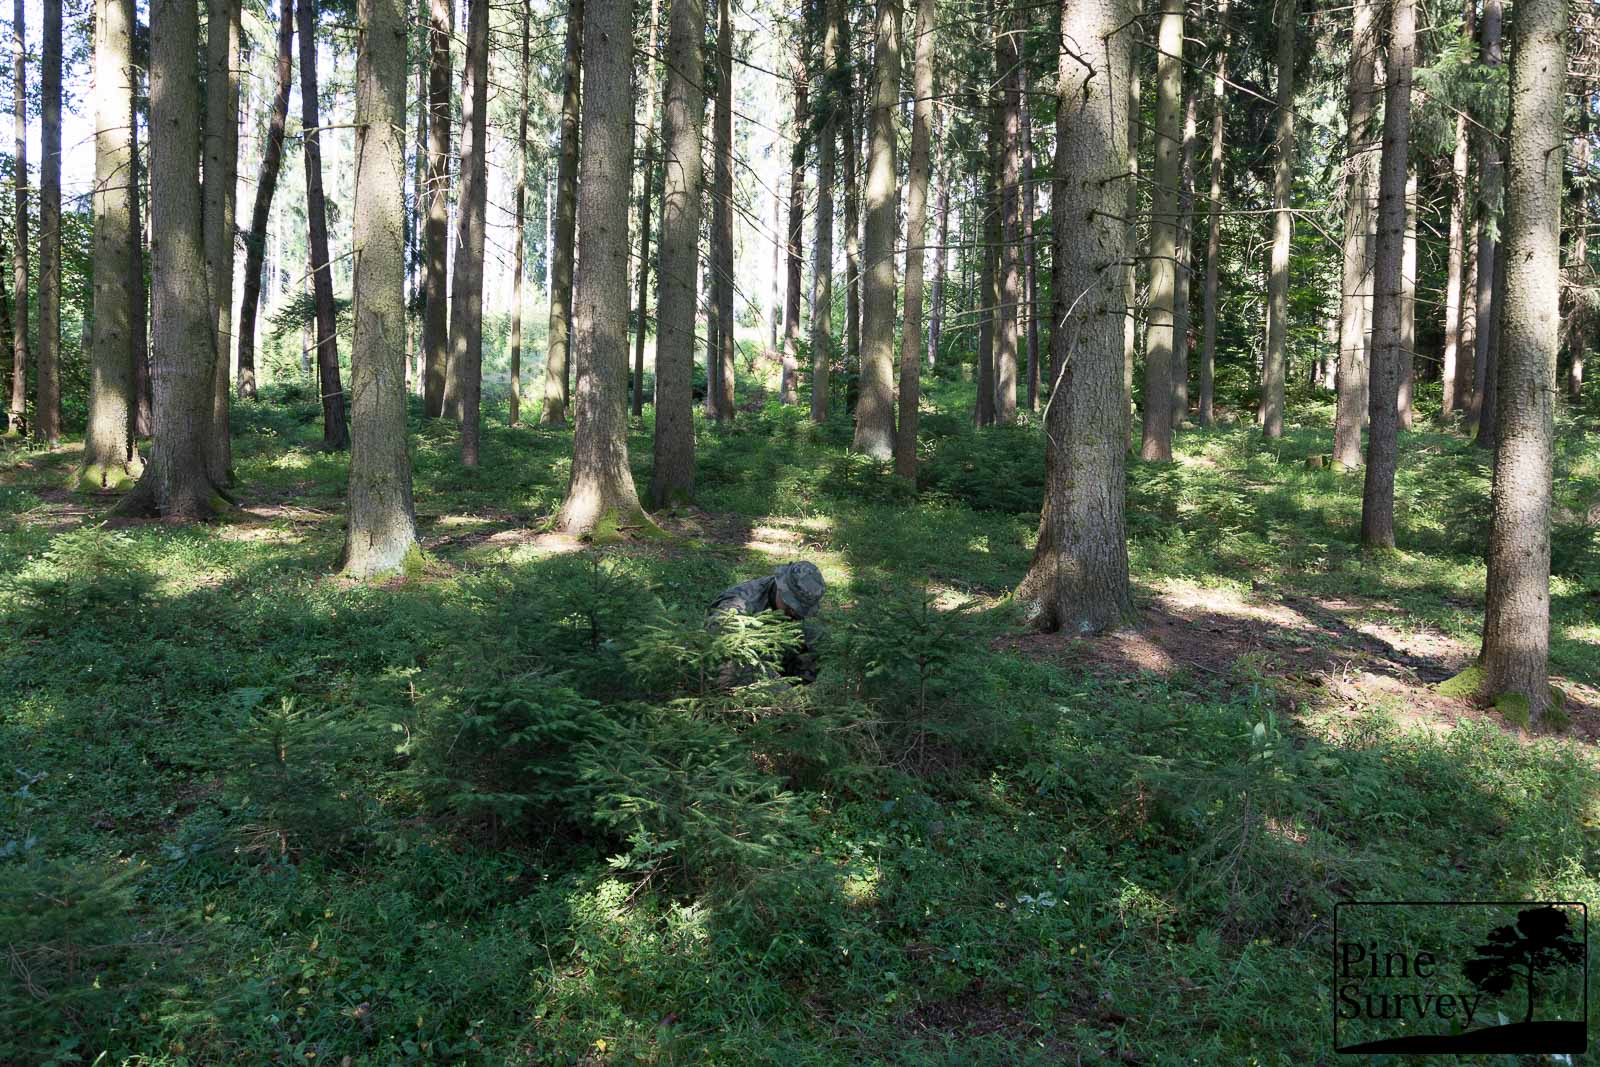 PL Woodland in the kneeling position - wide angle